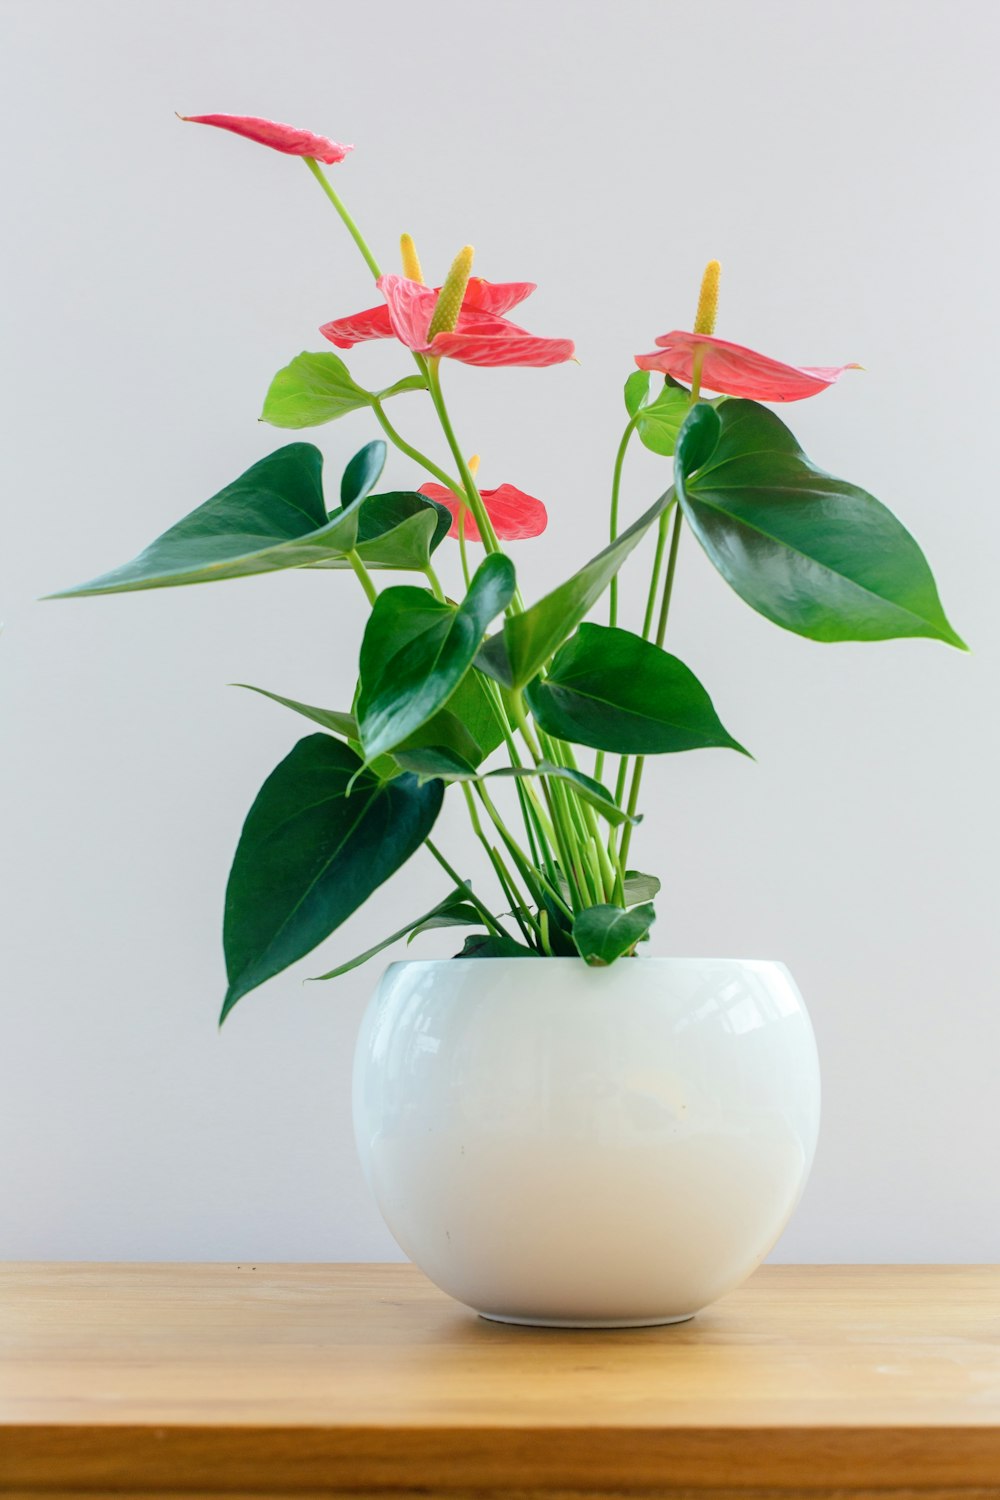 a plant in a white vase on a wooden table